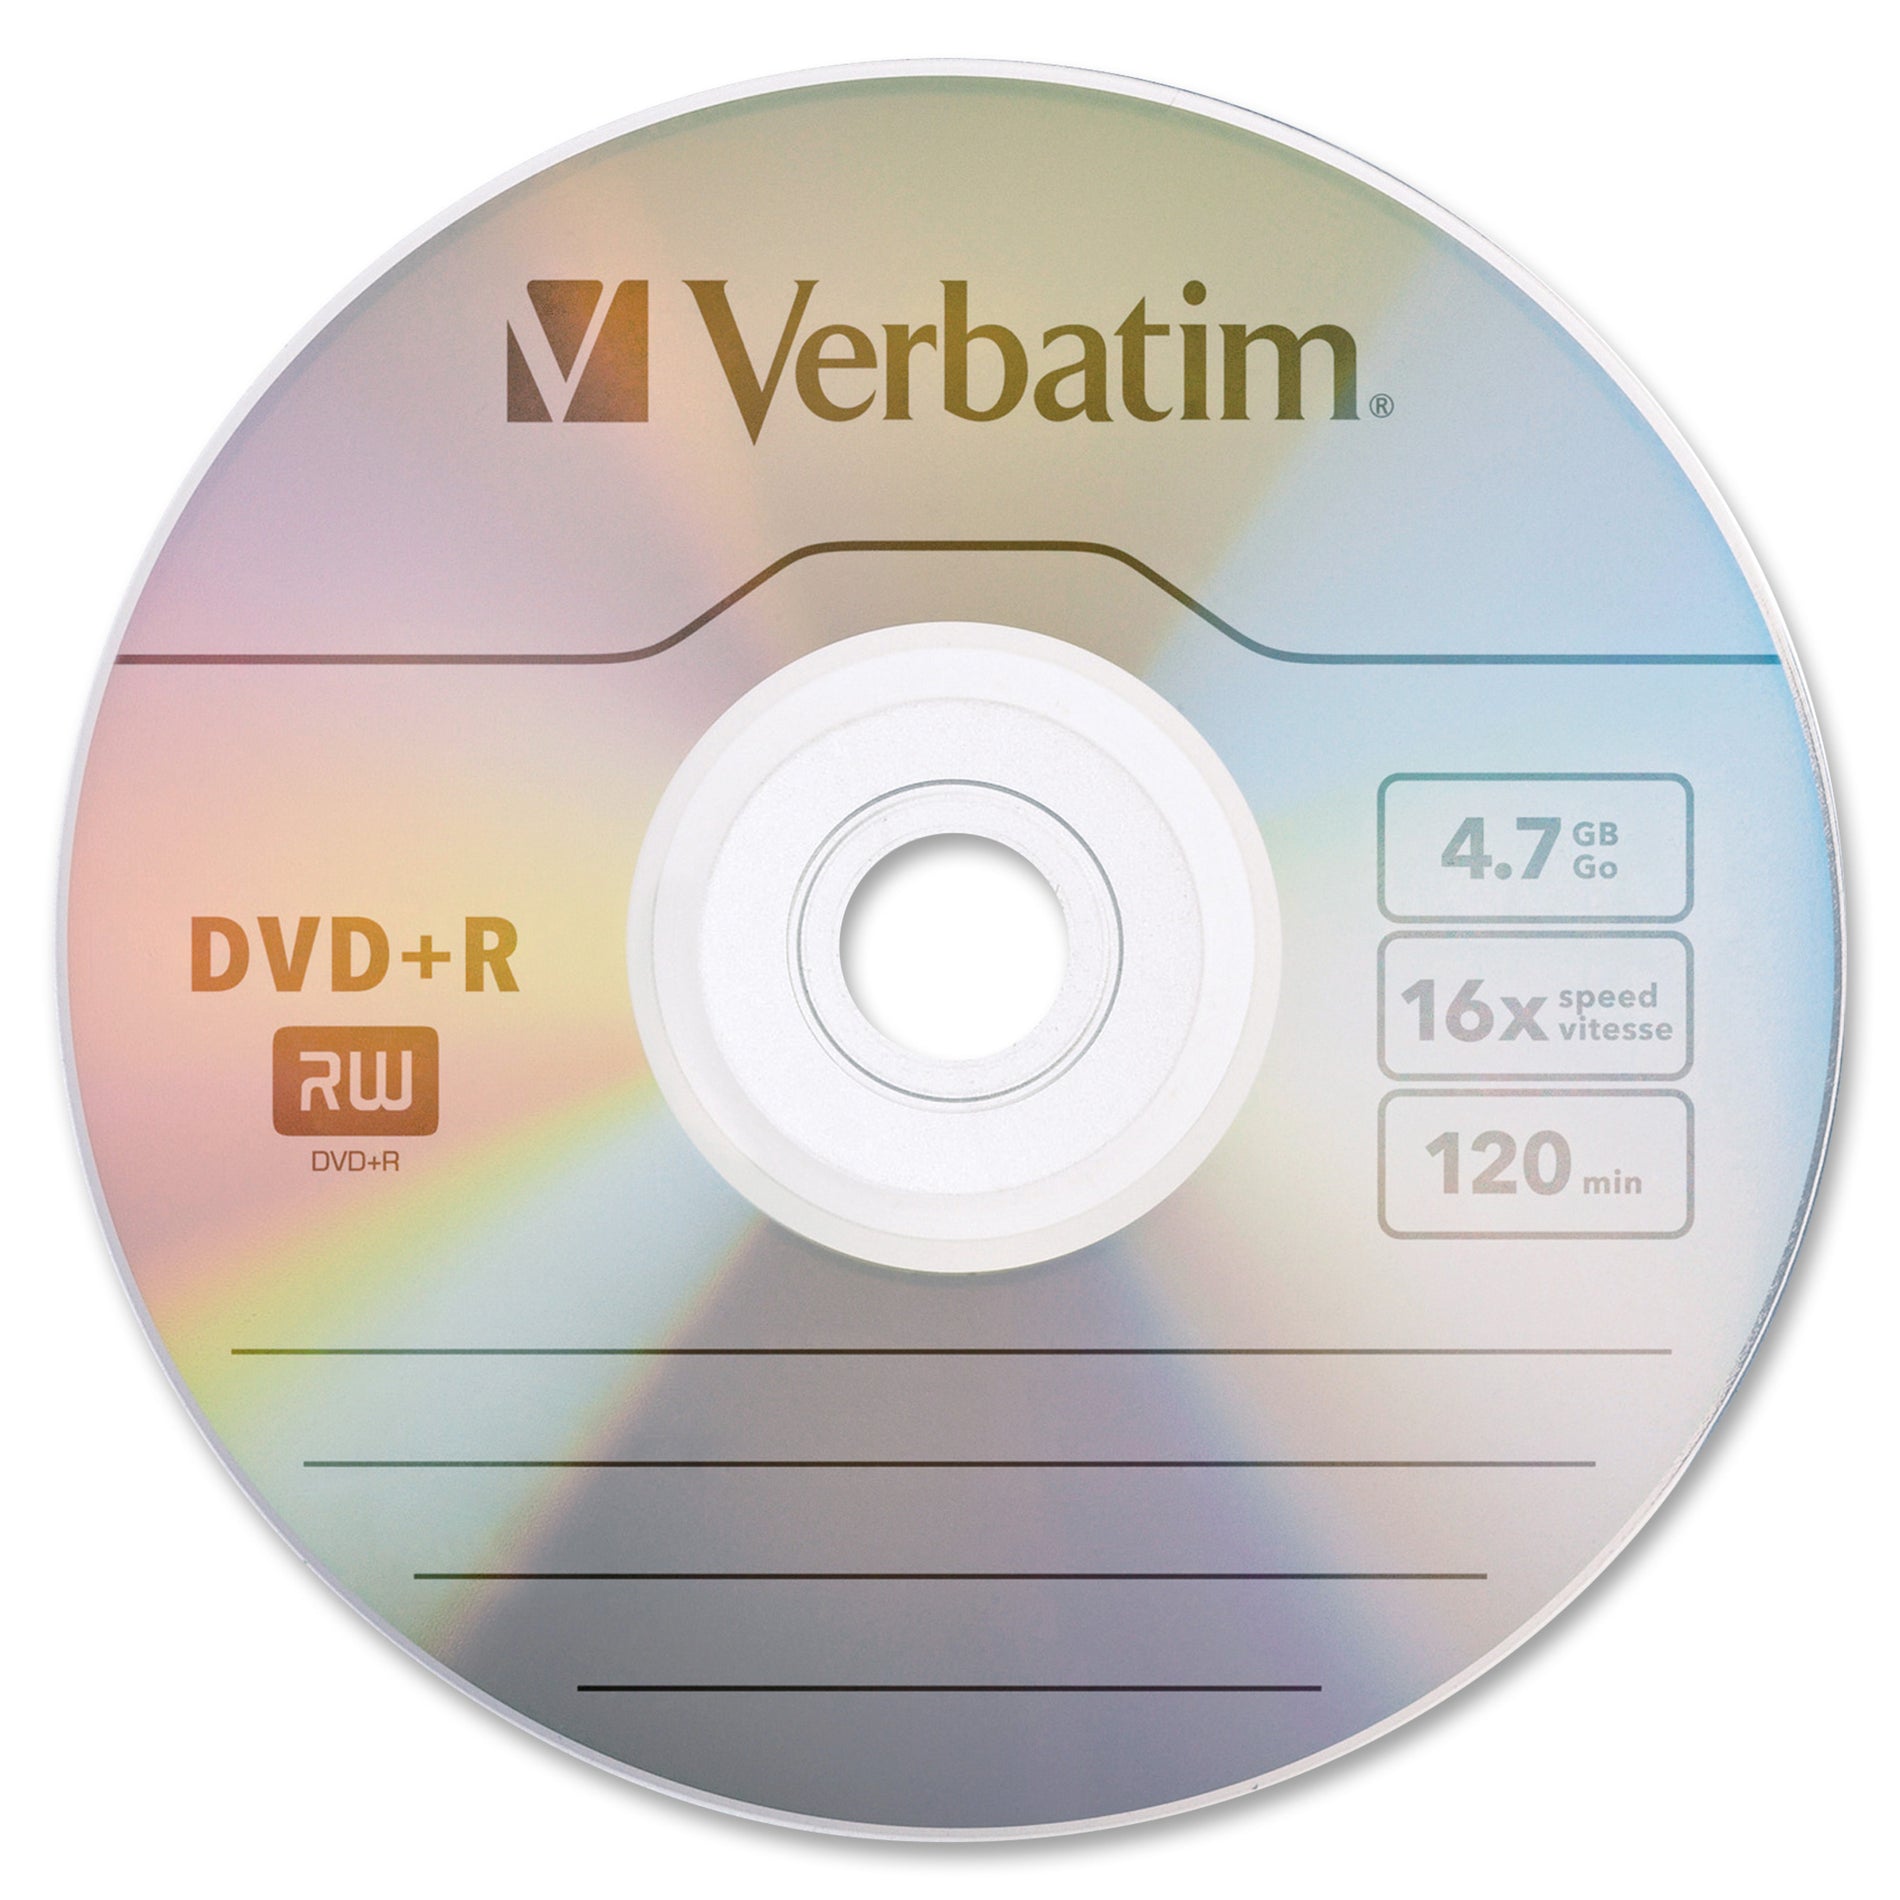 Verbatim 95101 AZO DVD-R 4.7GB 16X with Branded Surface - 50pk Spindle, 16X Speed, 4.7GB, For Recorders/Drives